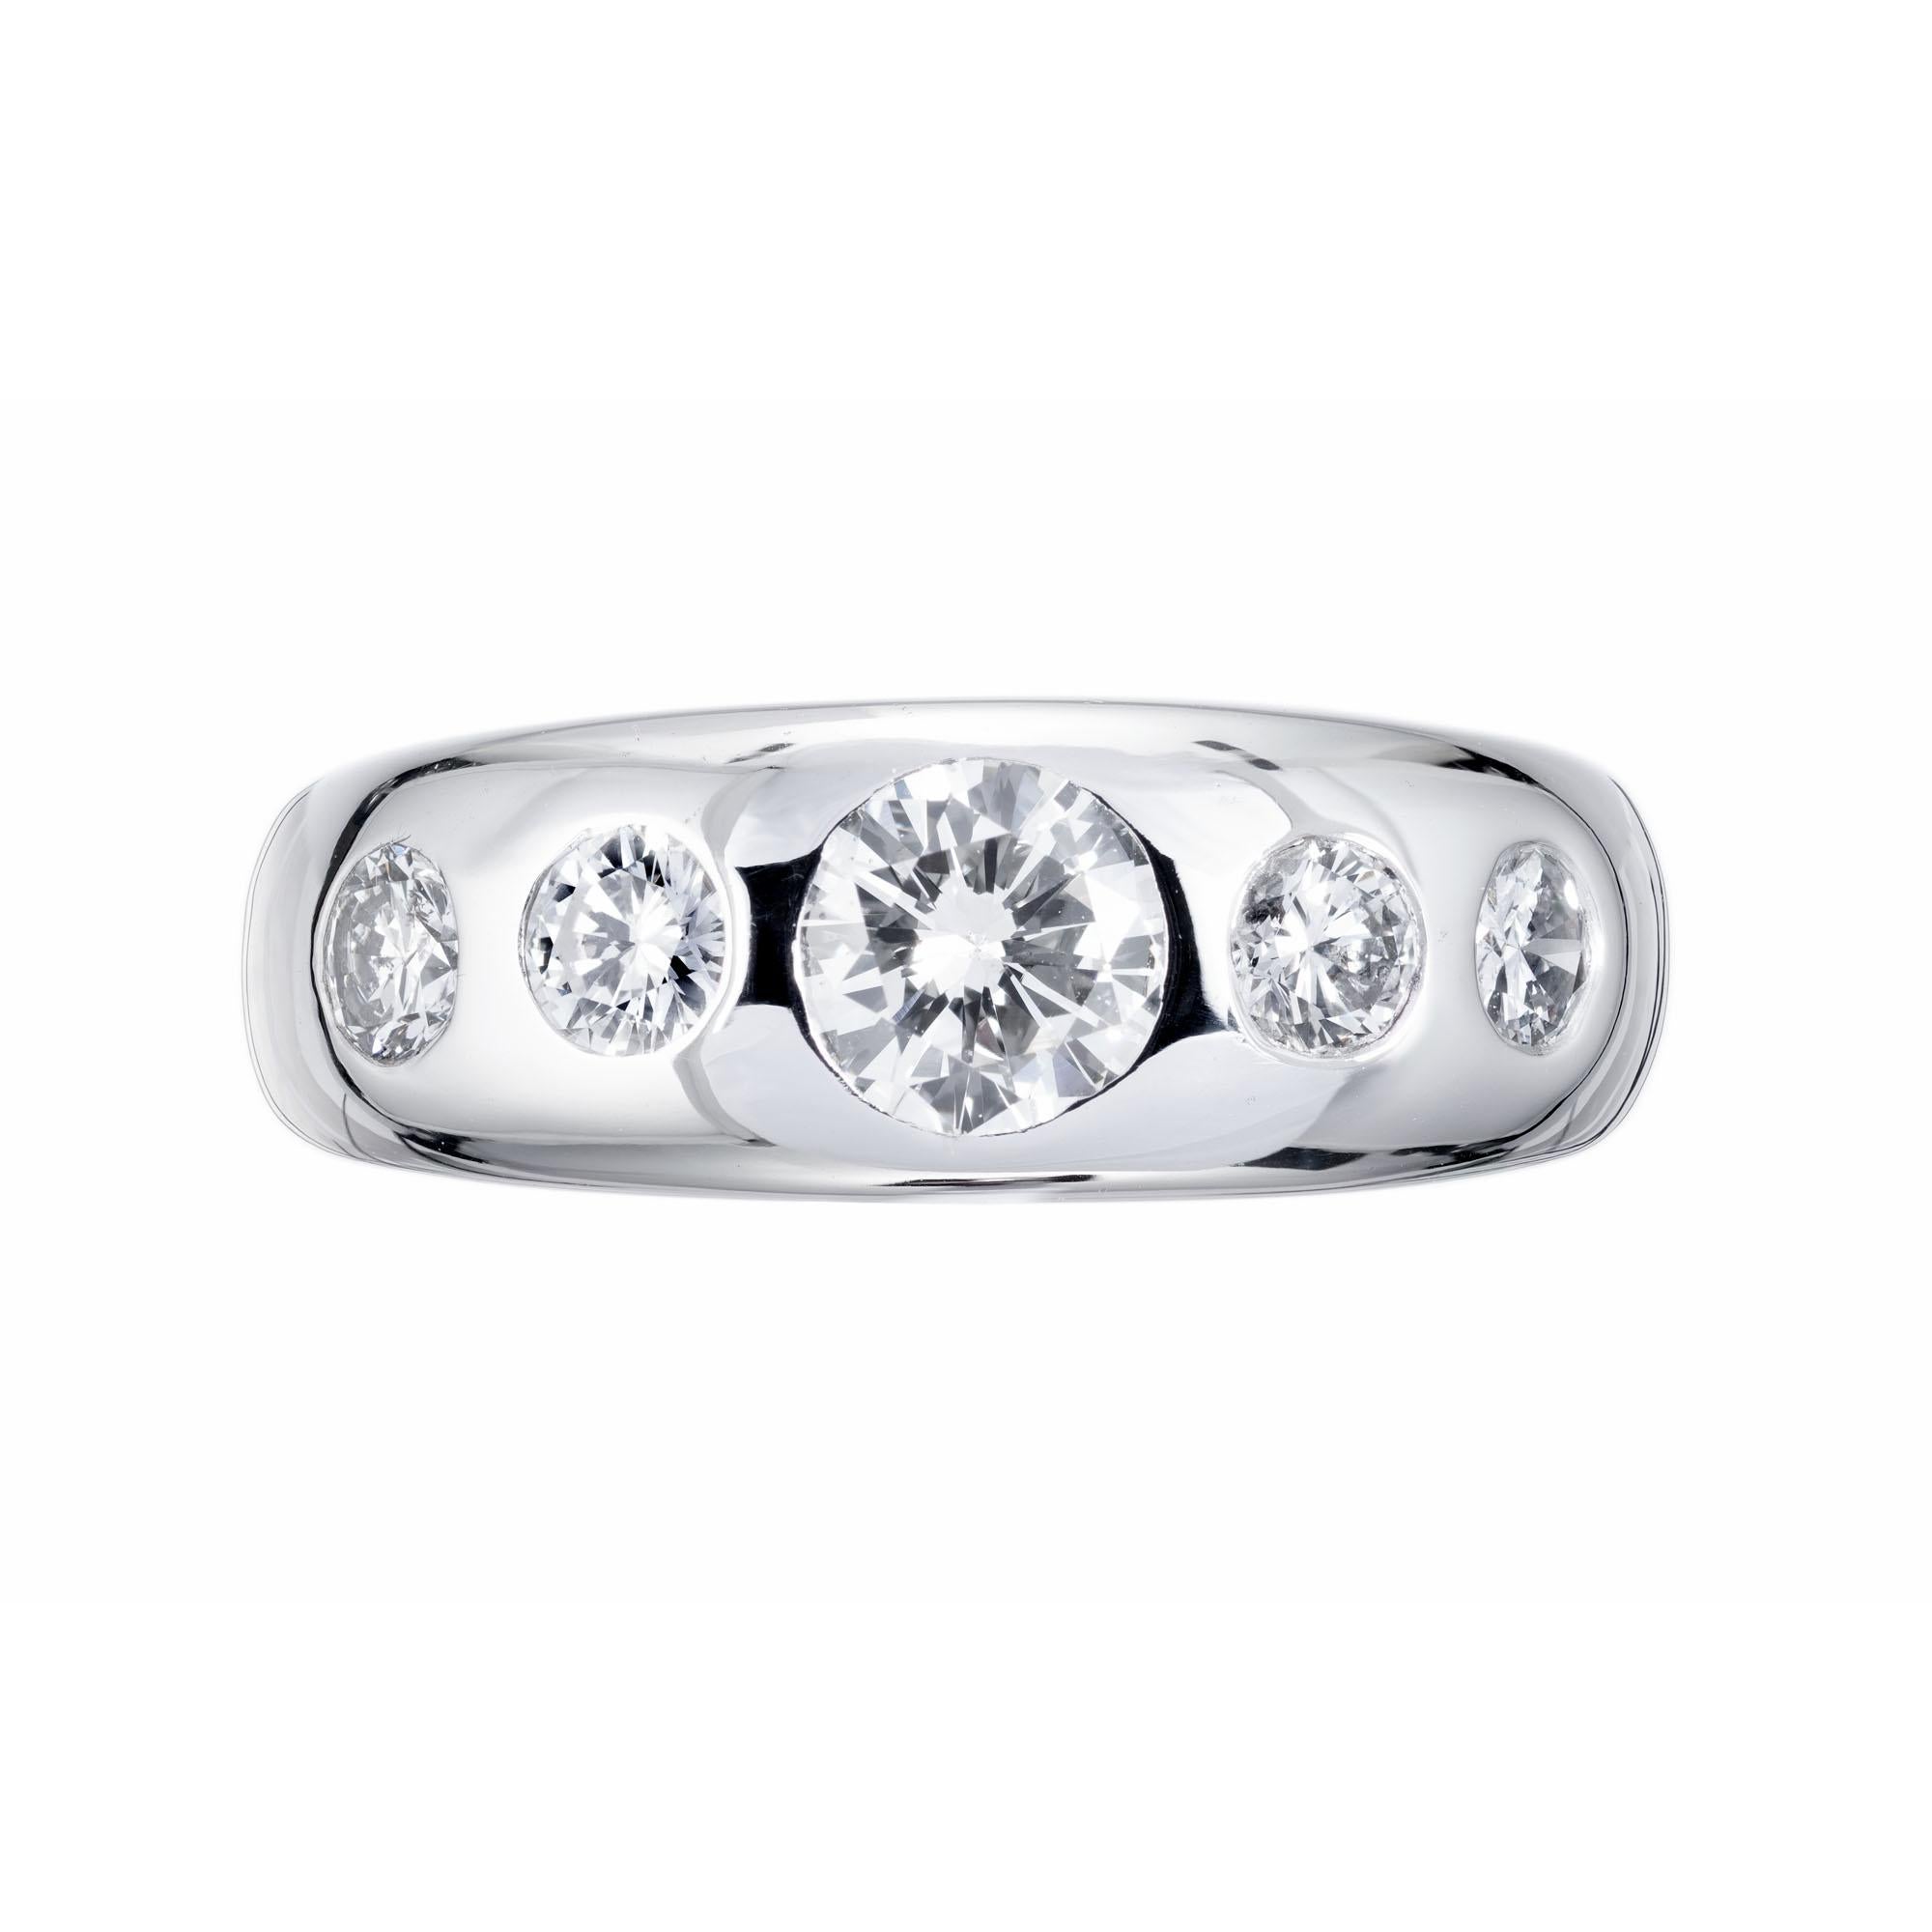 Handmade diamond gypsy style ring. Platinum setting with 5 round brilliant cut tapered flush set diamonds.

1 round brilliant cut diamond G SI, approx. .50cts
4 round brilliant cut diamonds G-H VS-SI, approx. .54cts
Size 6.5 and sizable +/- one